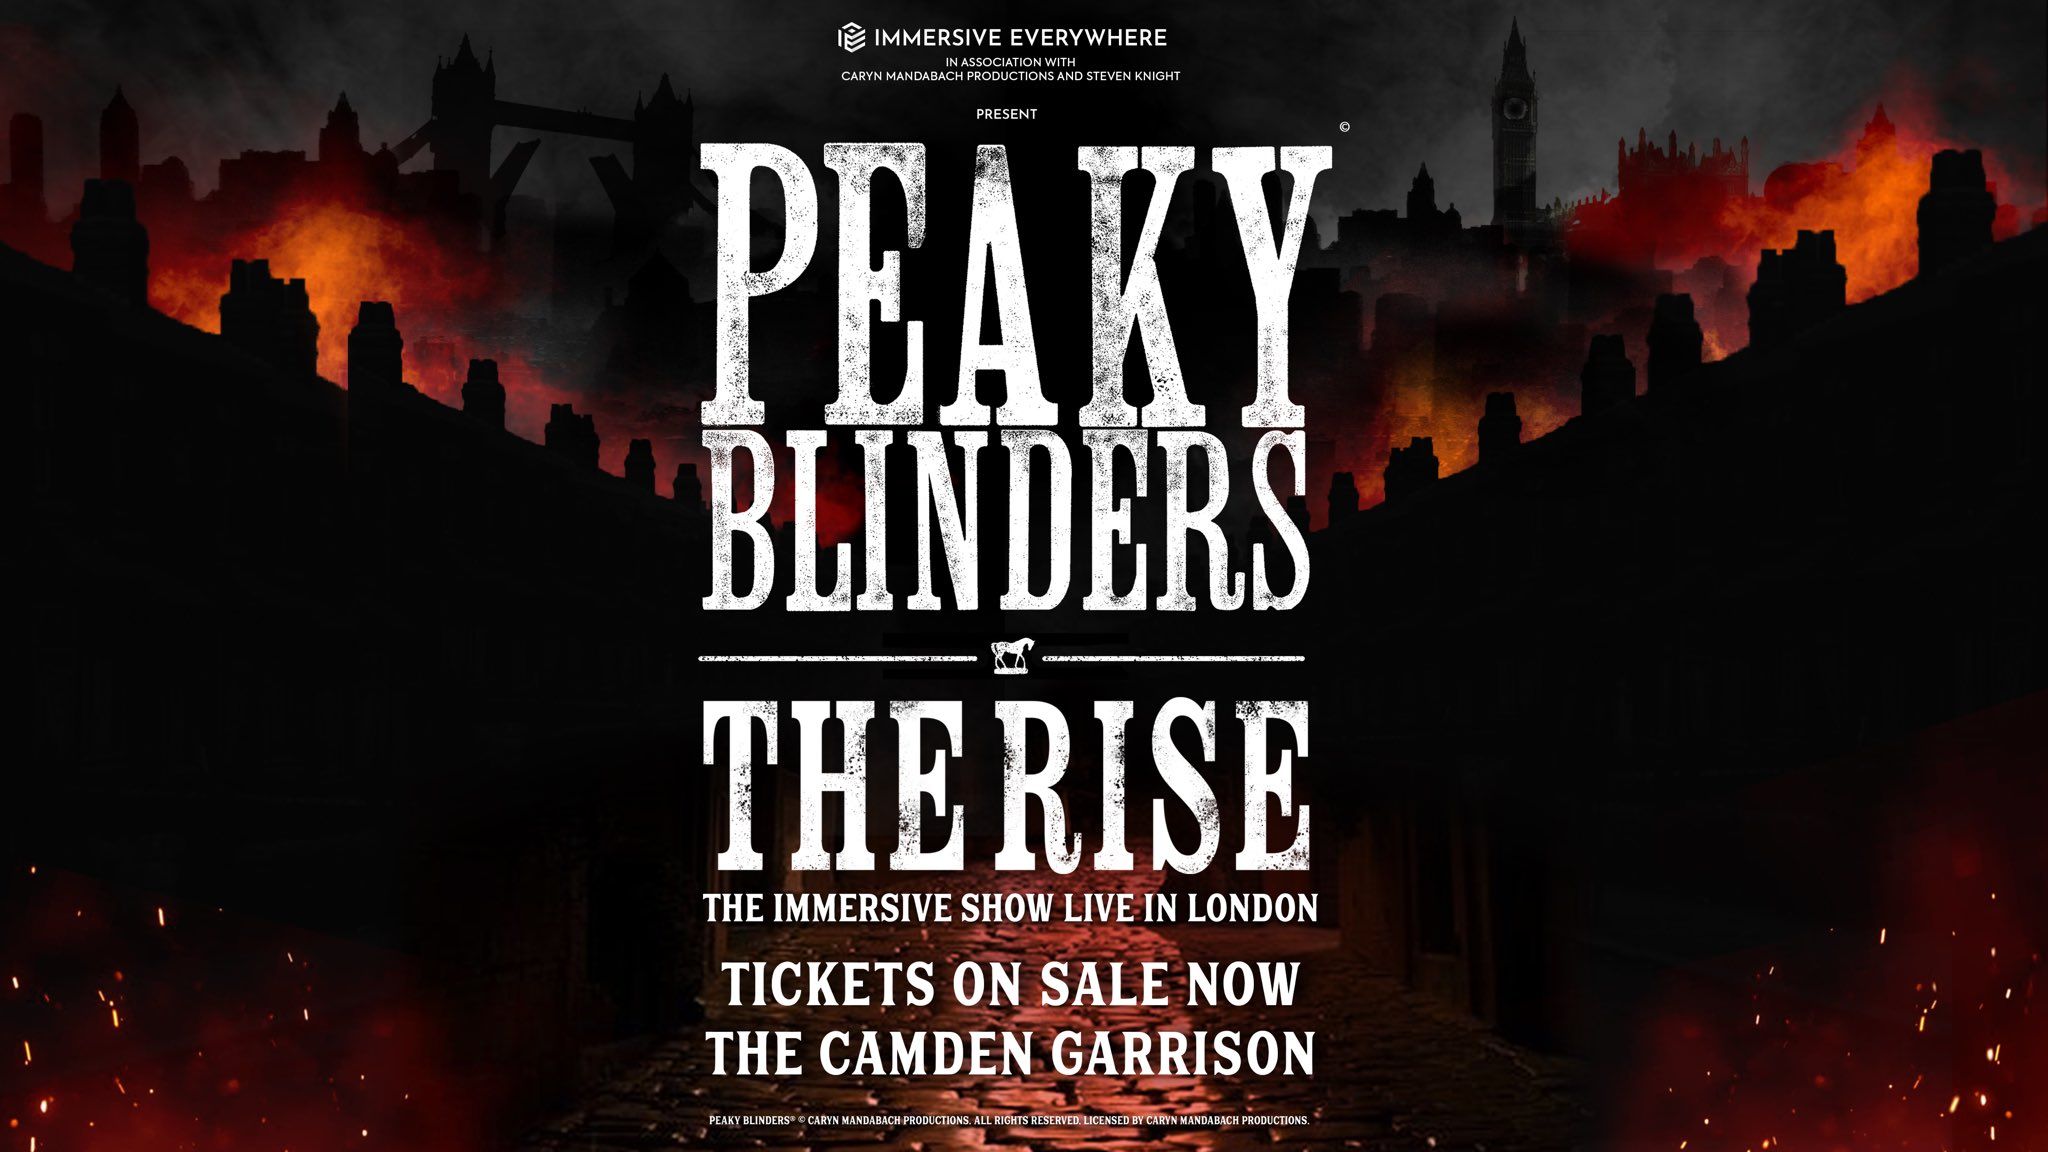 The Shelbys have got their new headquarters to campaign for London's acquisition. Get Peaky Blinders: The Rise tickets now.